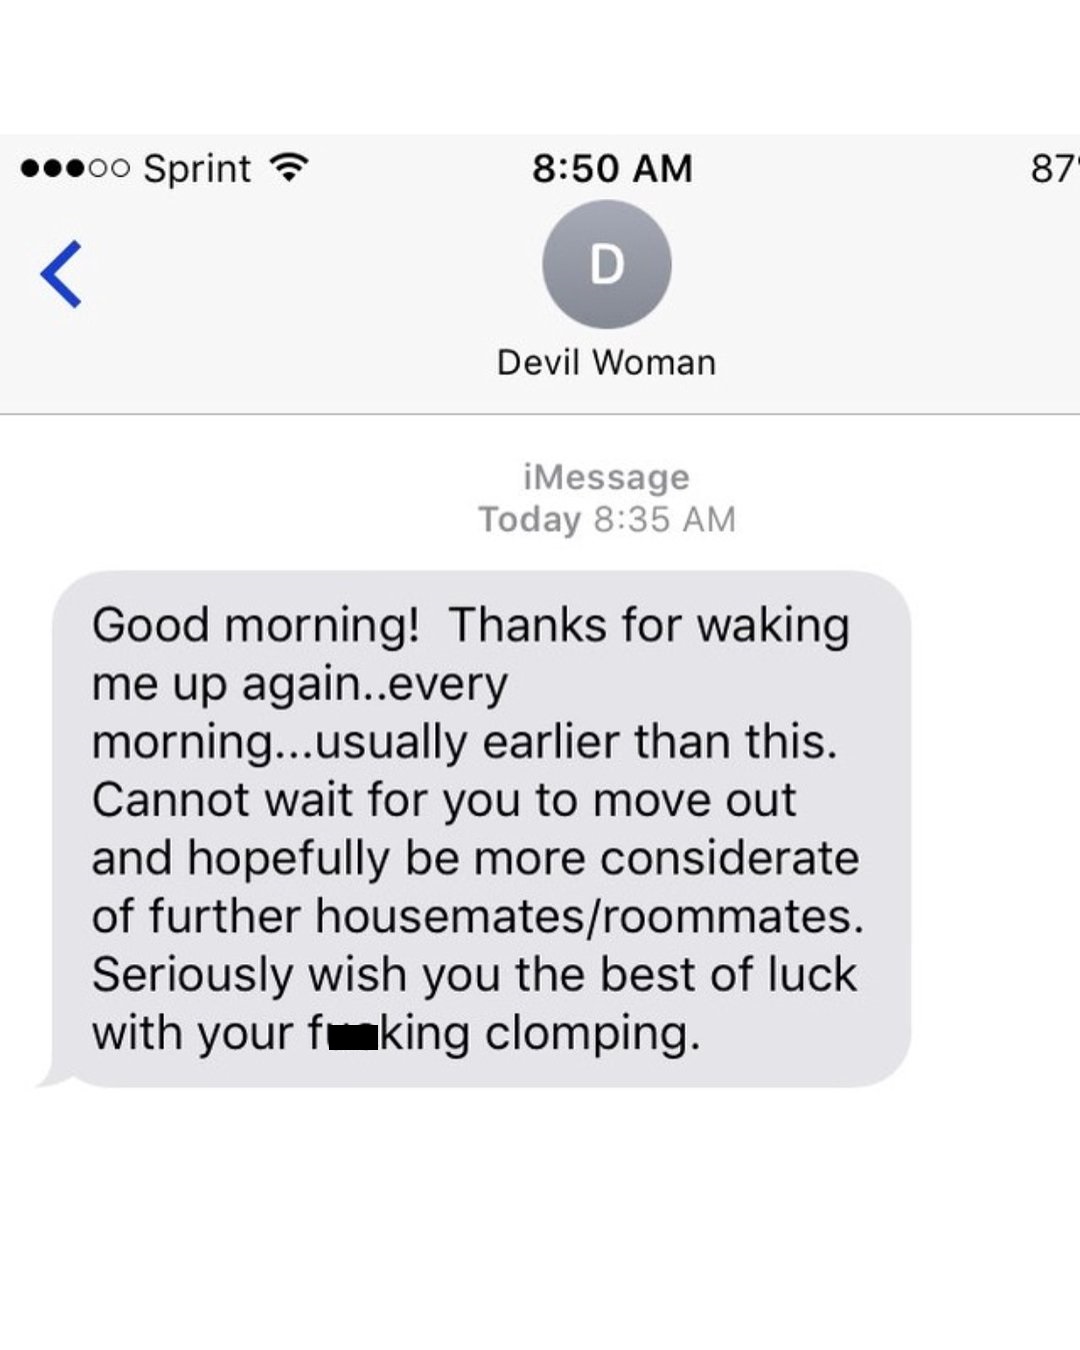 nightmare neighbor number - 00 Sprint 87 D Devil Woman iMessage Today Good morning! Thanks for waking me up again..every morning...usually earlier than this. Cannot wait for you to move out and hopefully be more considerate of further housematesroommates.